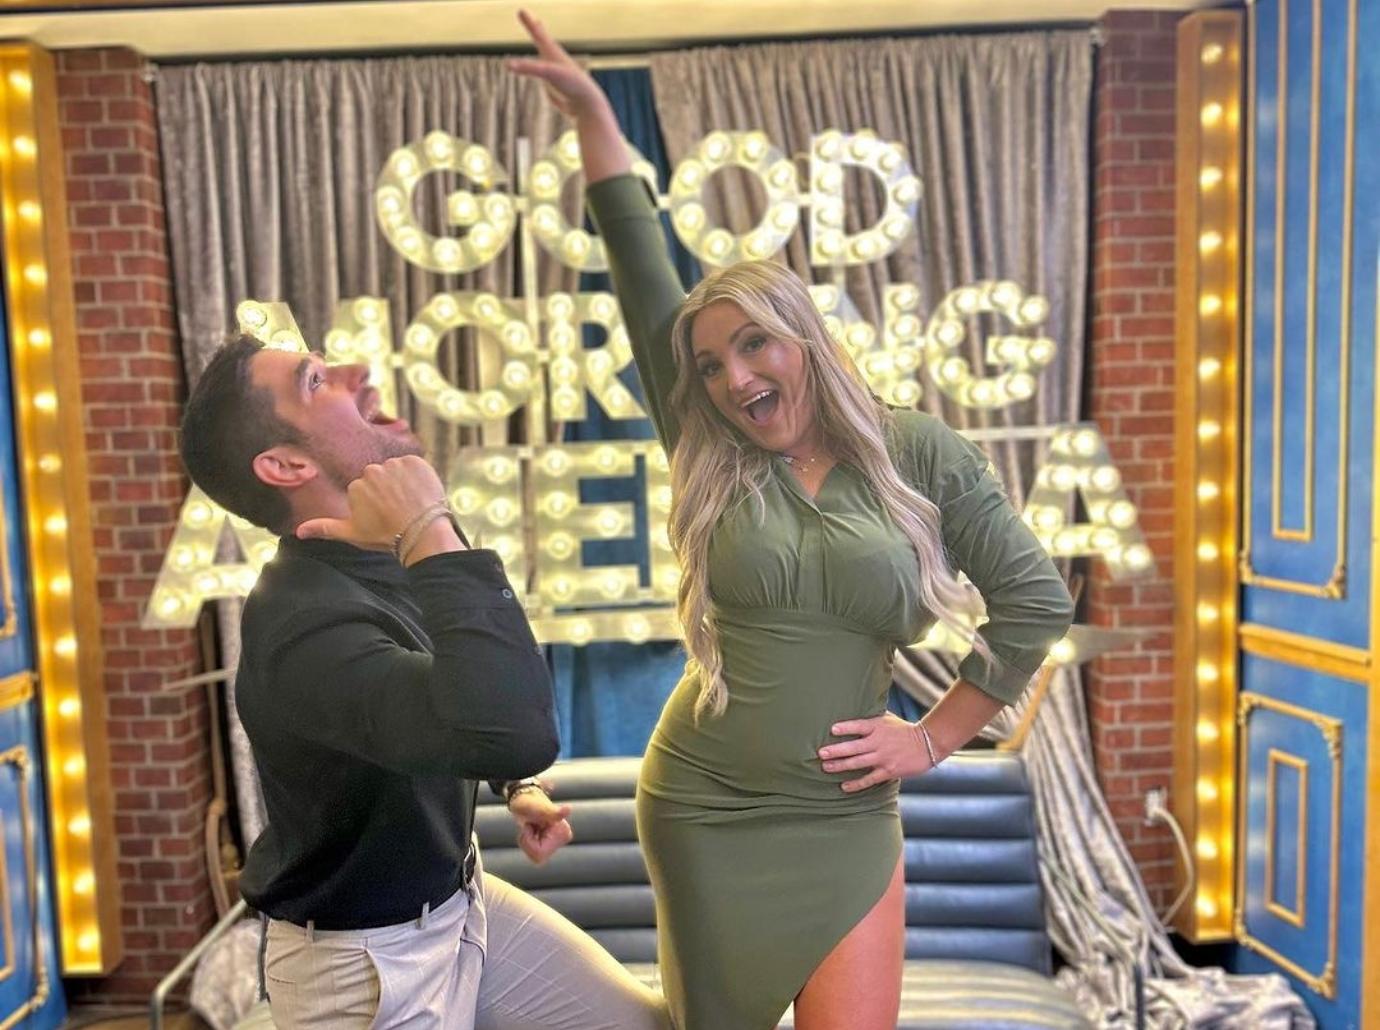 Jamie Lynn Spears Joining DWTS Leaves Fans Of The Show Outraged image pic